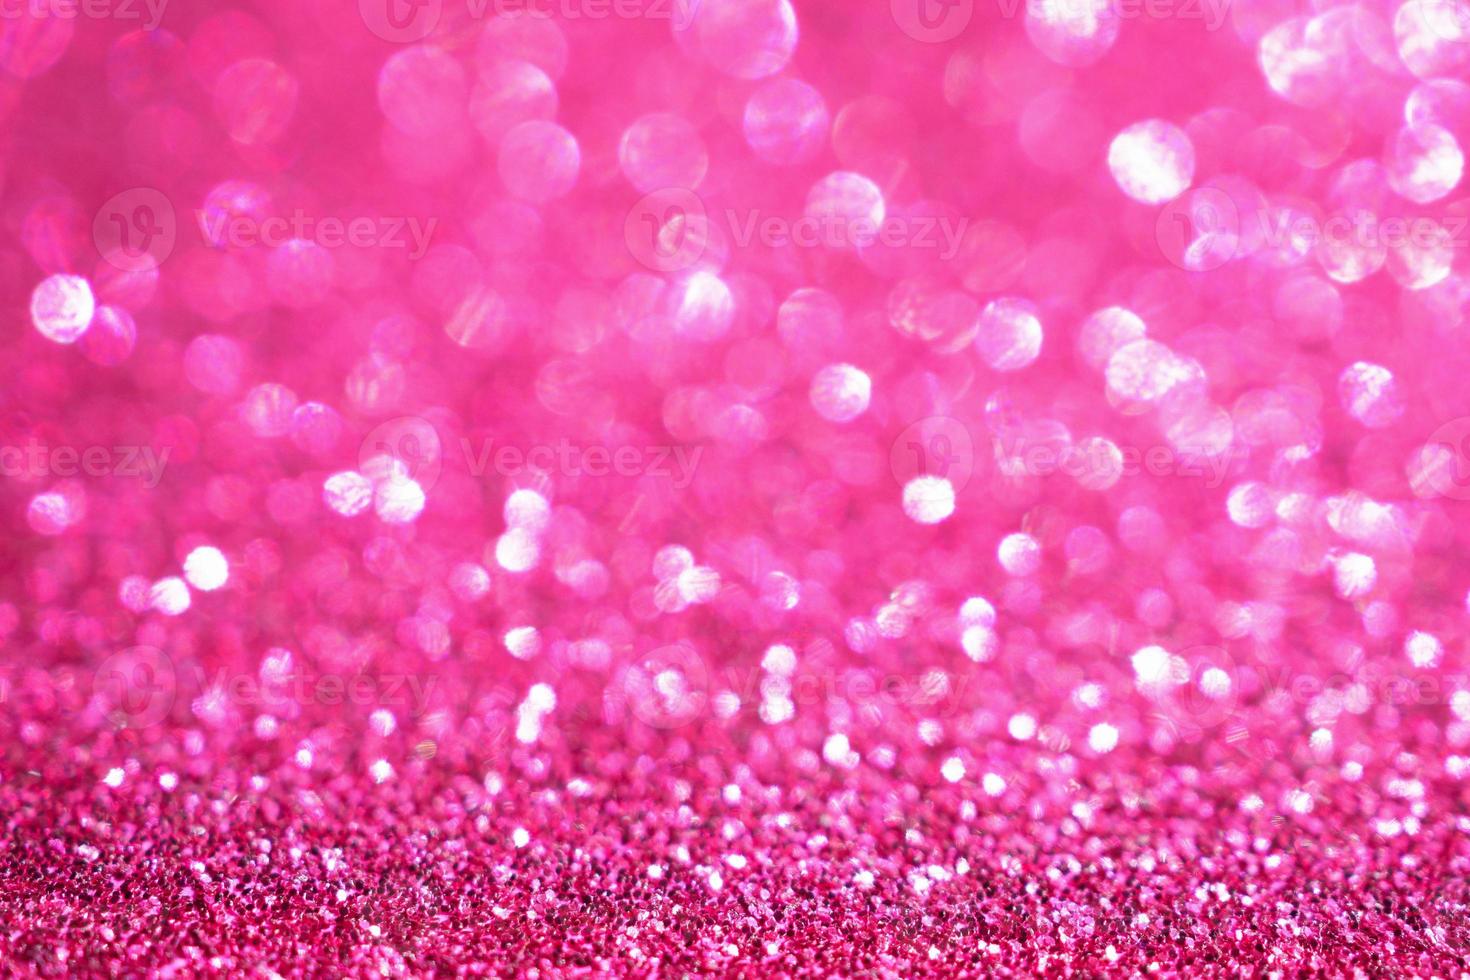 pink glitter texture abstract background photo